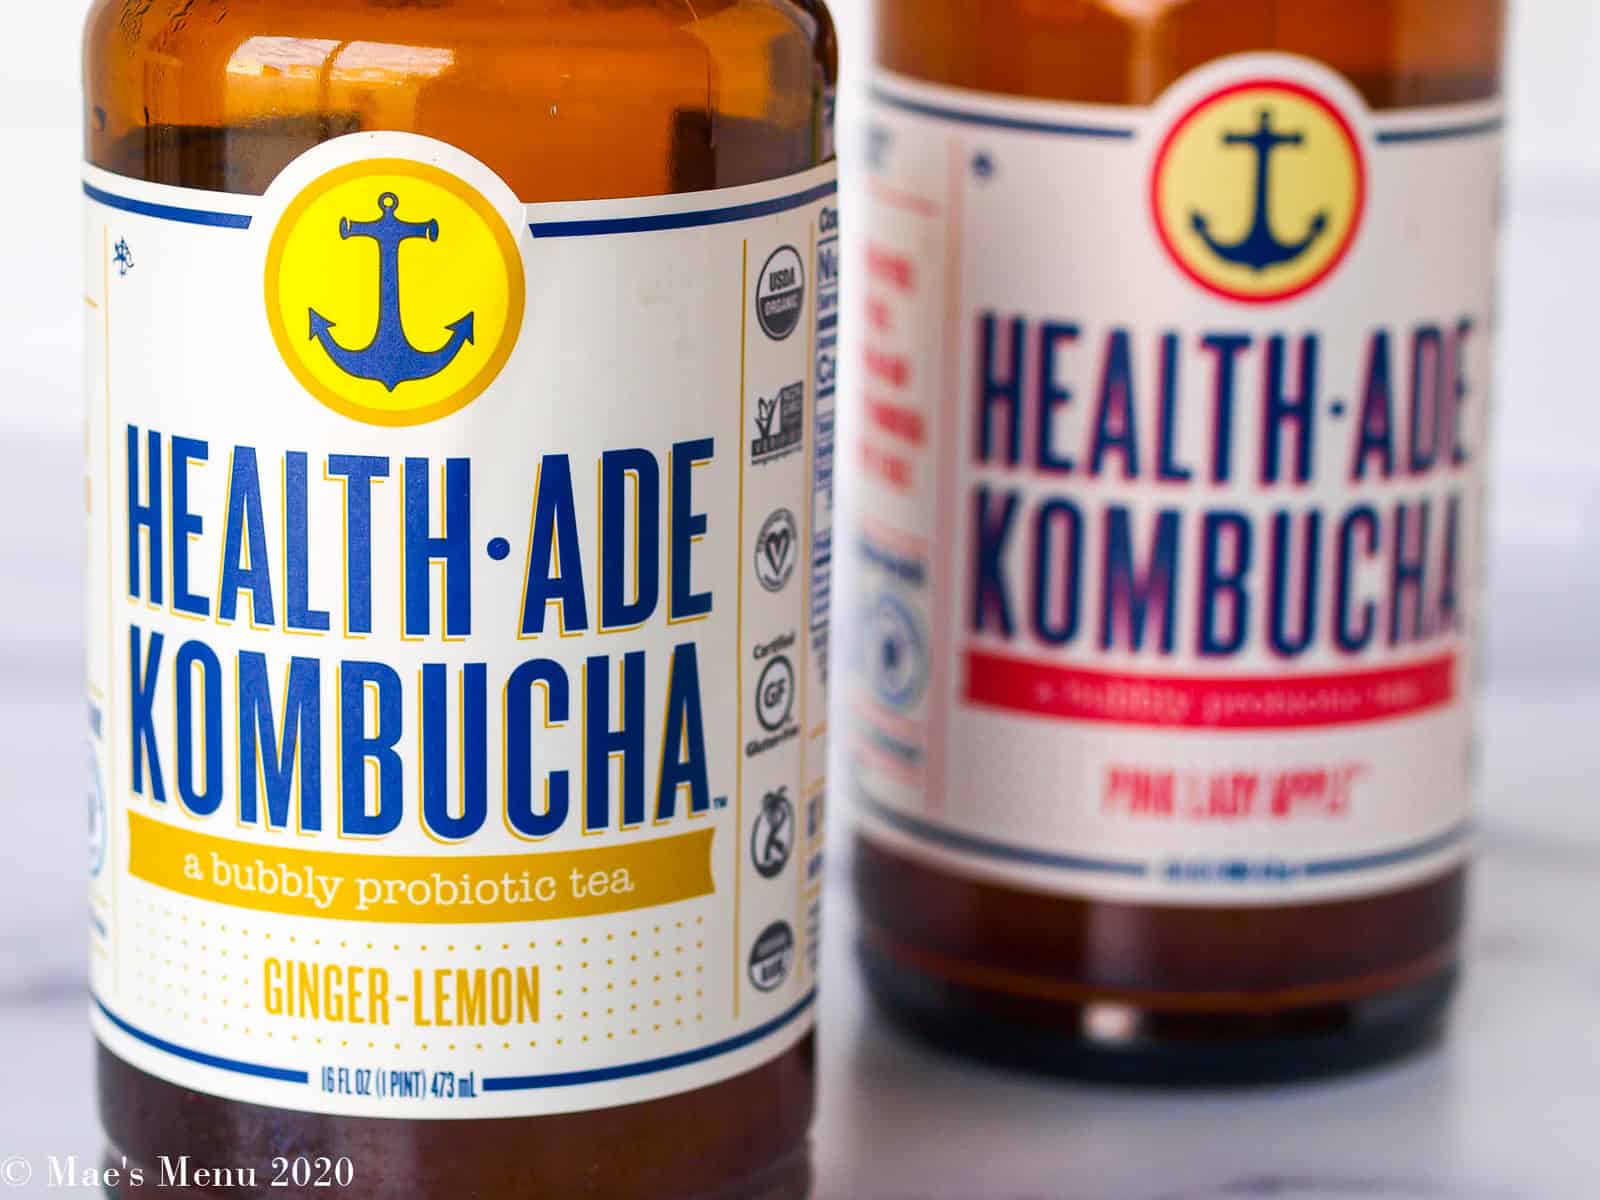 An up-close shot of two bottles of health-ade kombucha: one bottle of ginger lemon an the other of pink lady apple